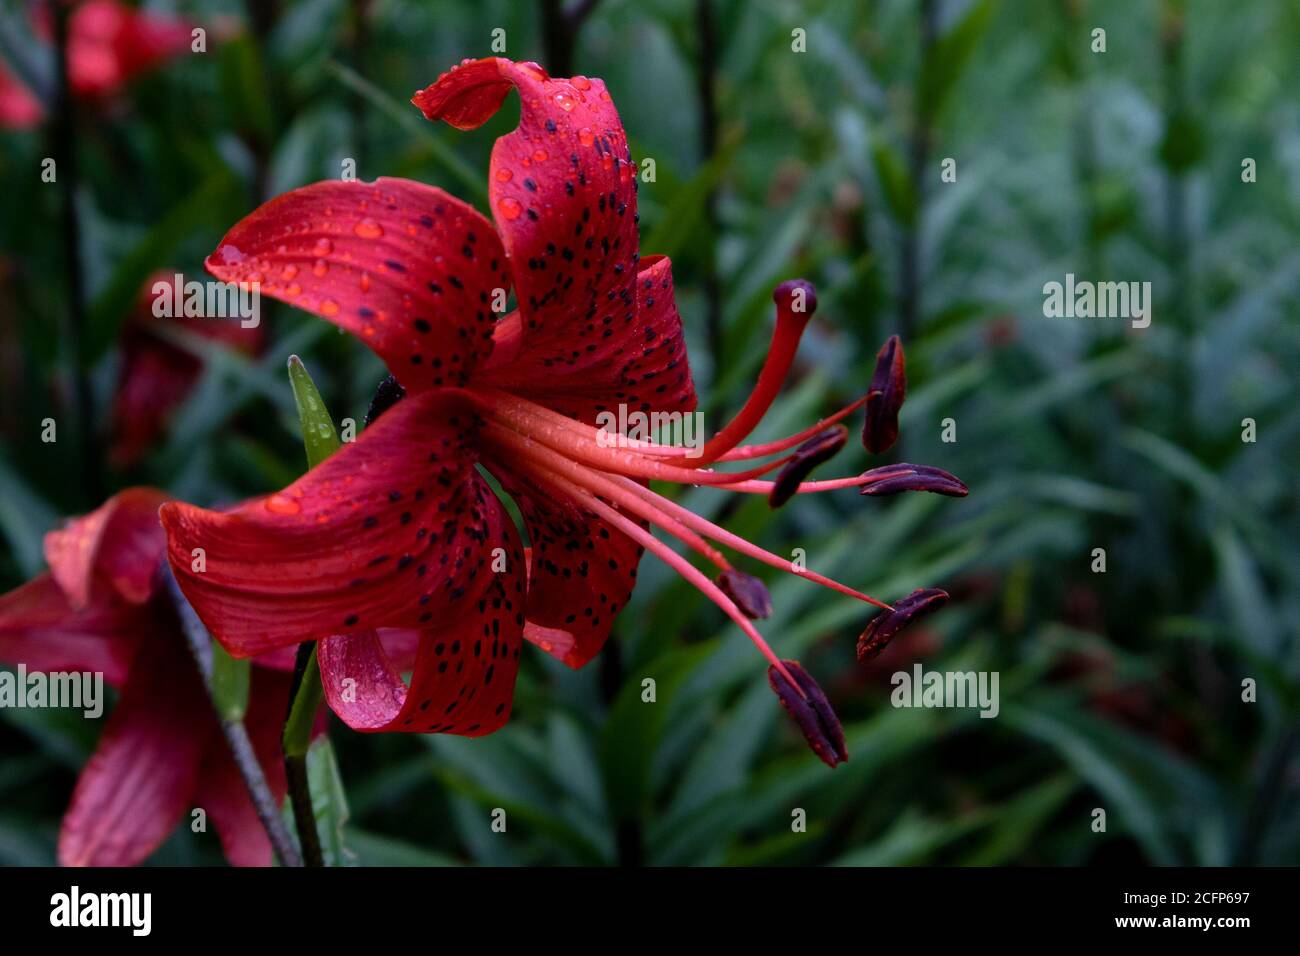 Gorgeous beautiful flower of red lilly with black specks and long stamens against green foliage Stock Photo